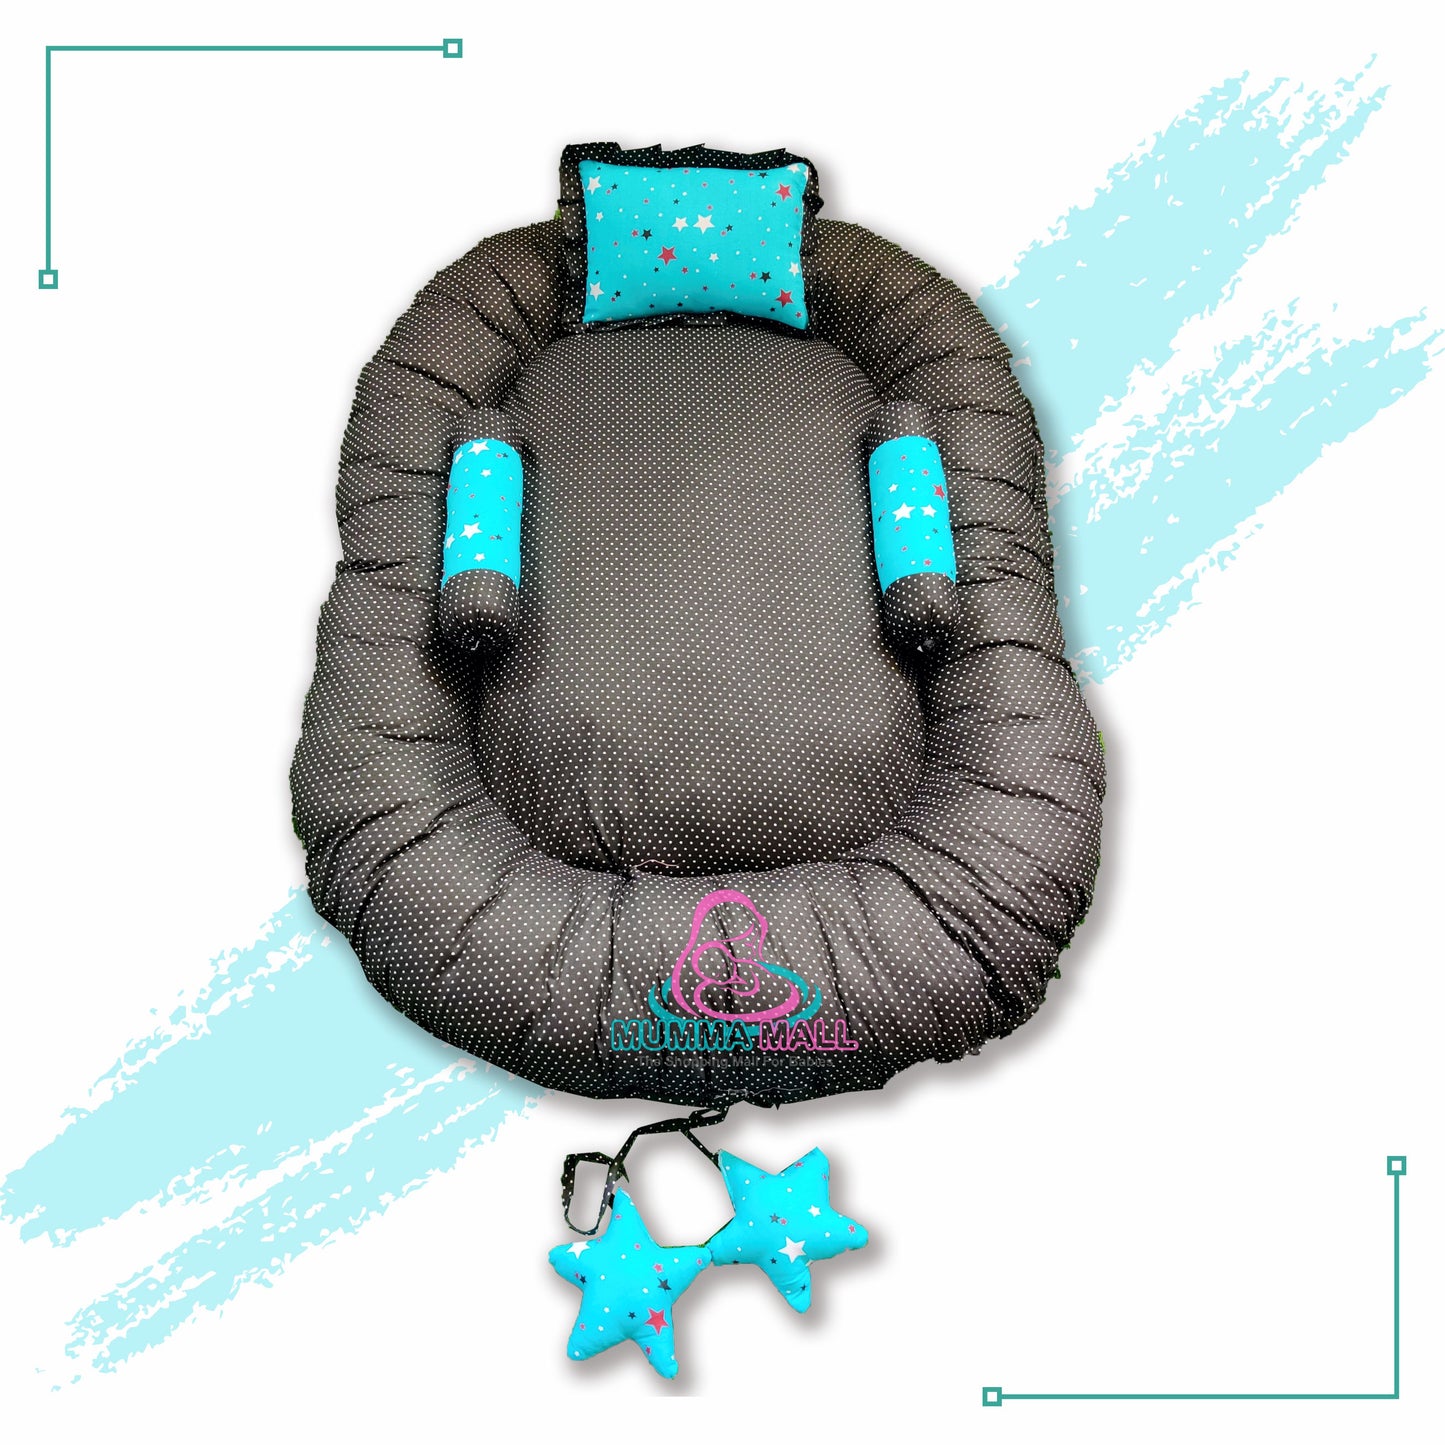 Baby nest bedding set with set of 3 pillows as neck support, side support and toy (Turquoise and Black)